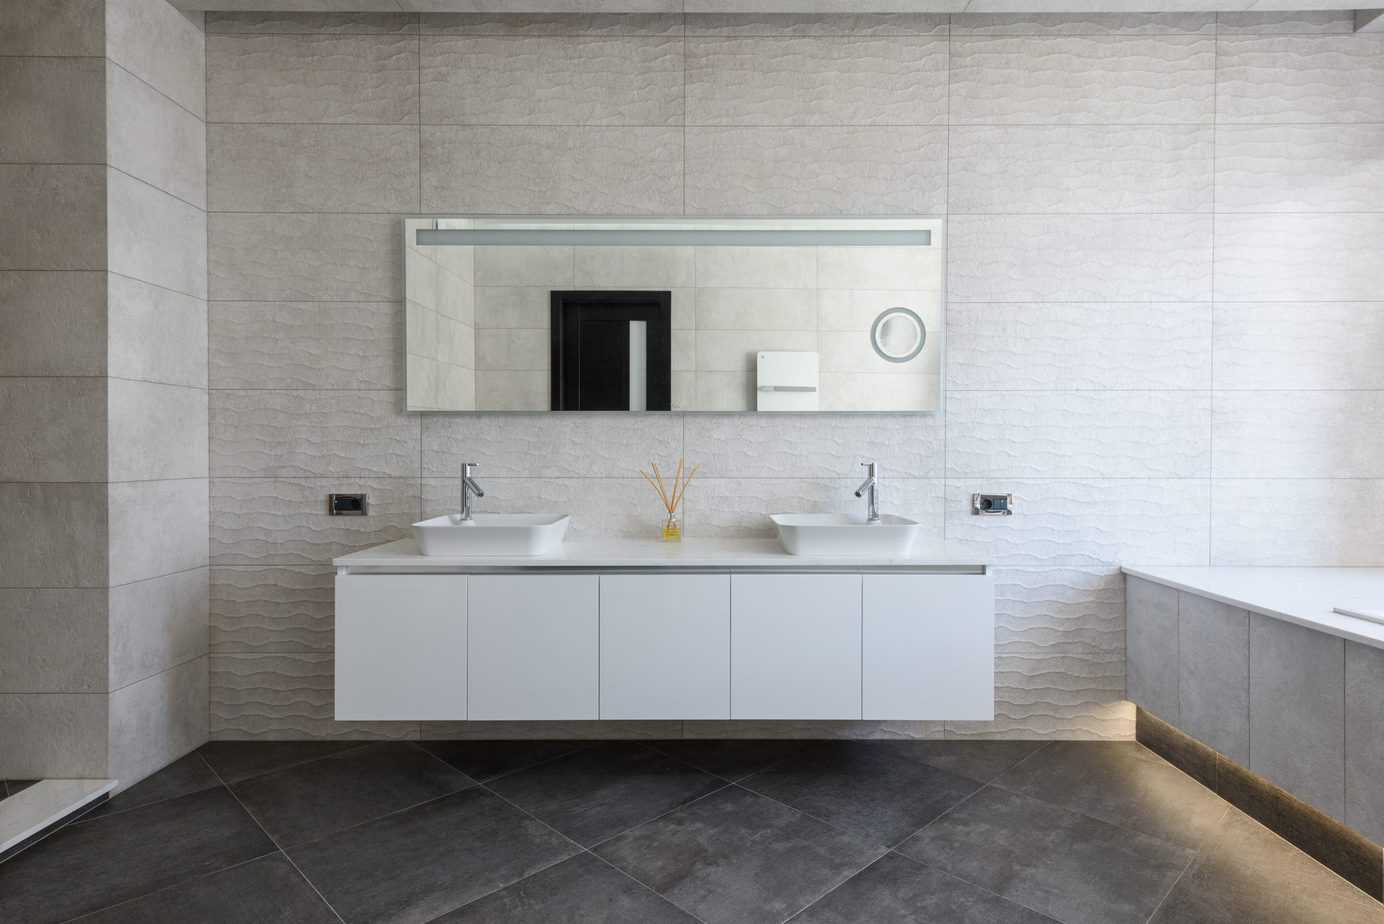 Choosing a mirror for the bathroom – this is what you should pay attention to